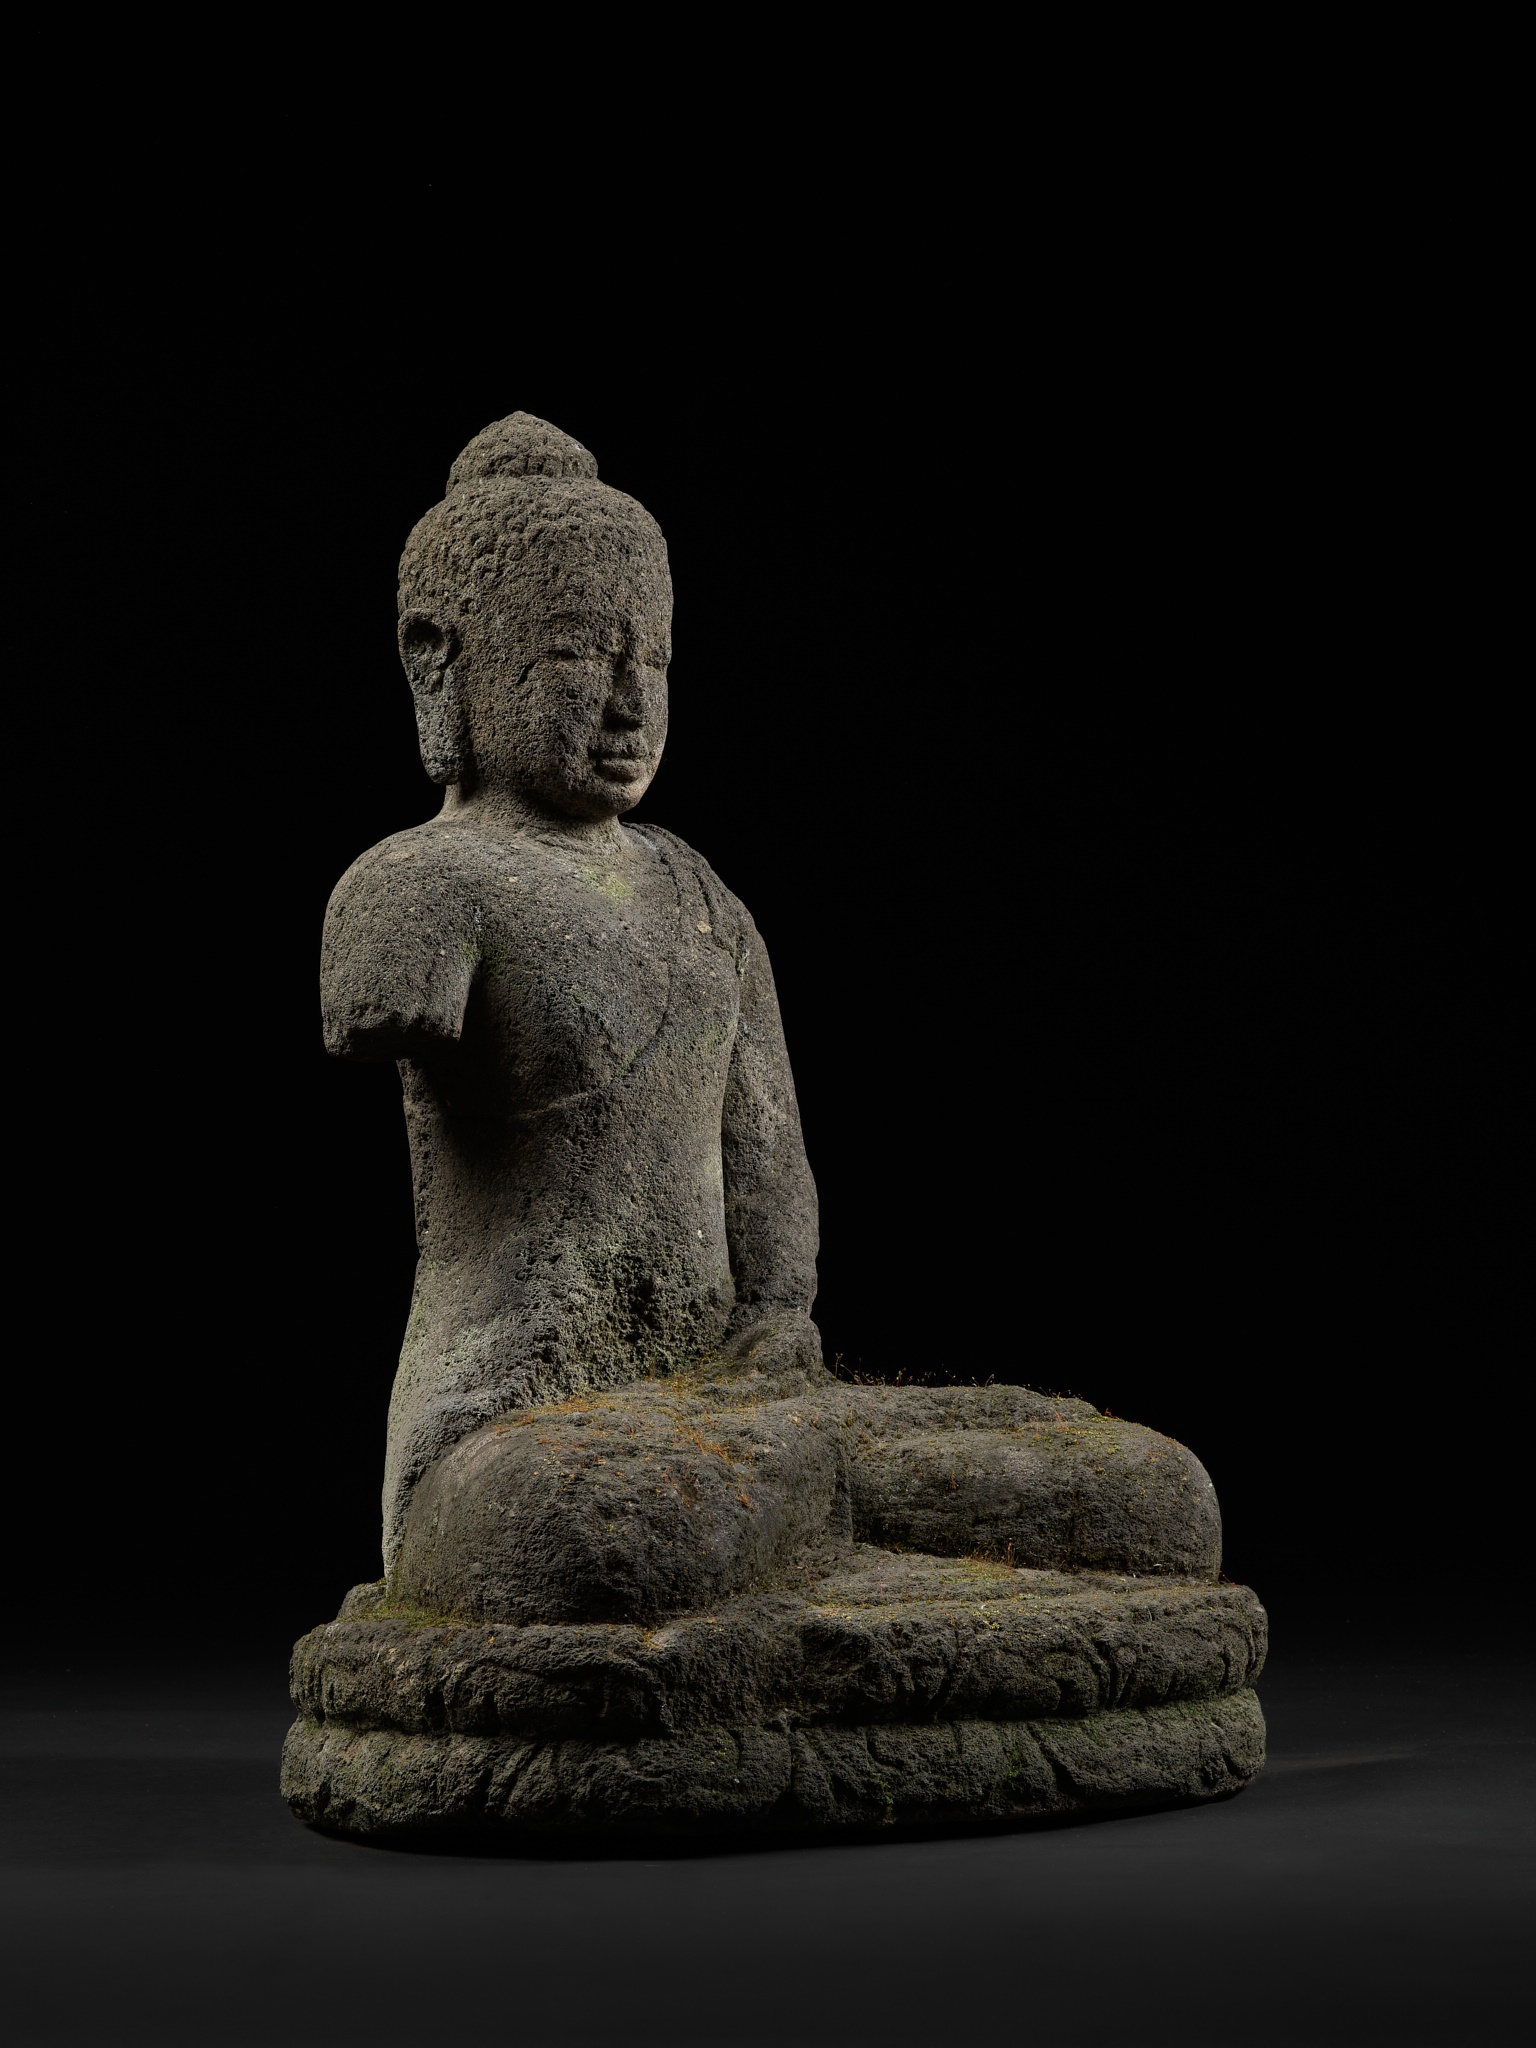 A VOLCANIC STONE FIGURE OF BUDDHA, CENTRAL JAVA, INDONESIA, FIRST HALF OF THE 9TH CENTURY - Image 13 of 14